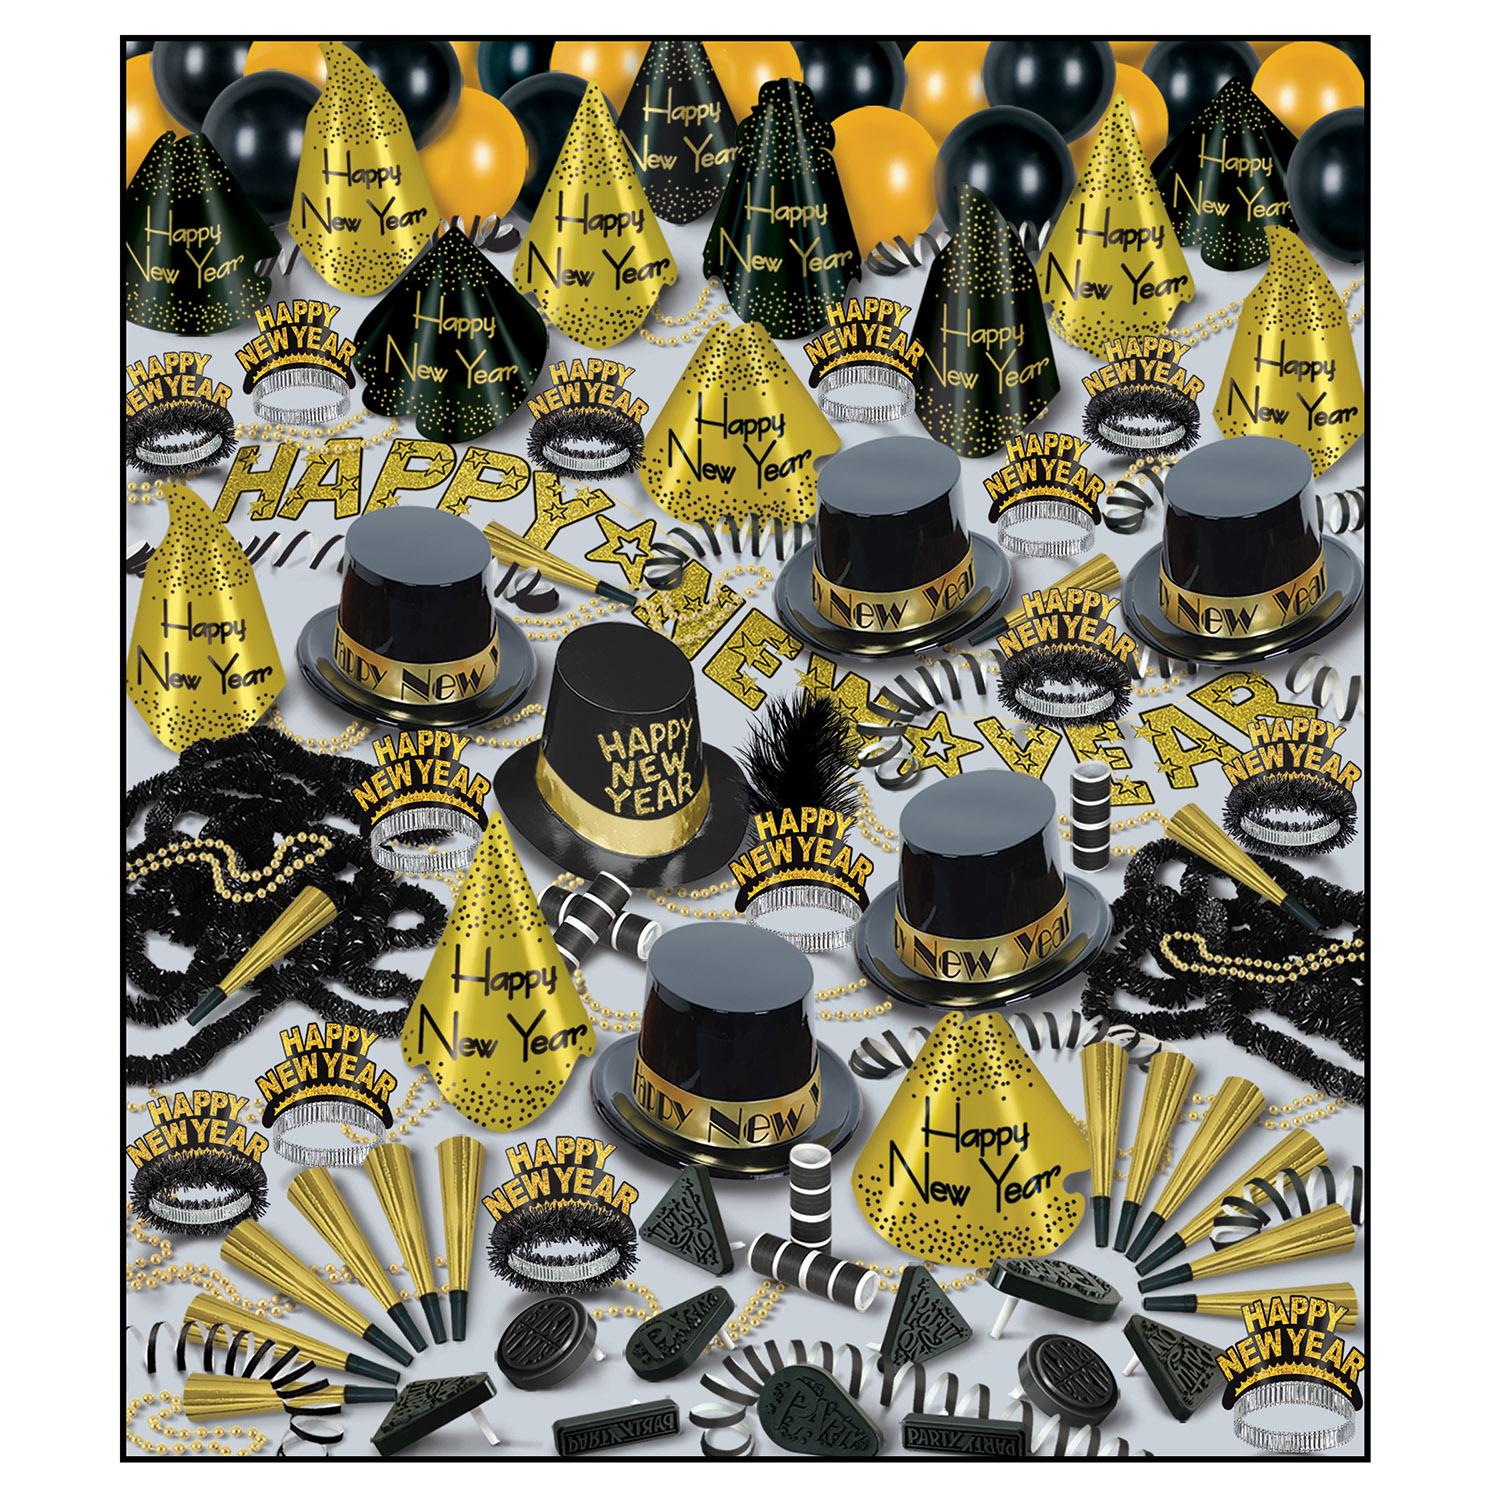 Golden Bonanza New Year's Eve Party Kit for 100 People